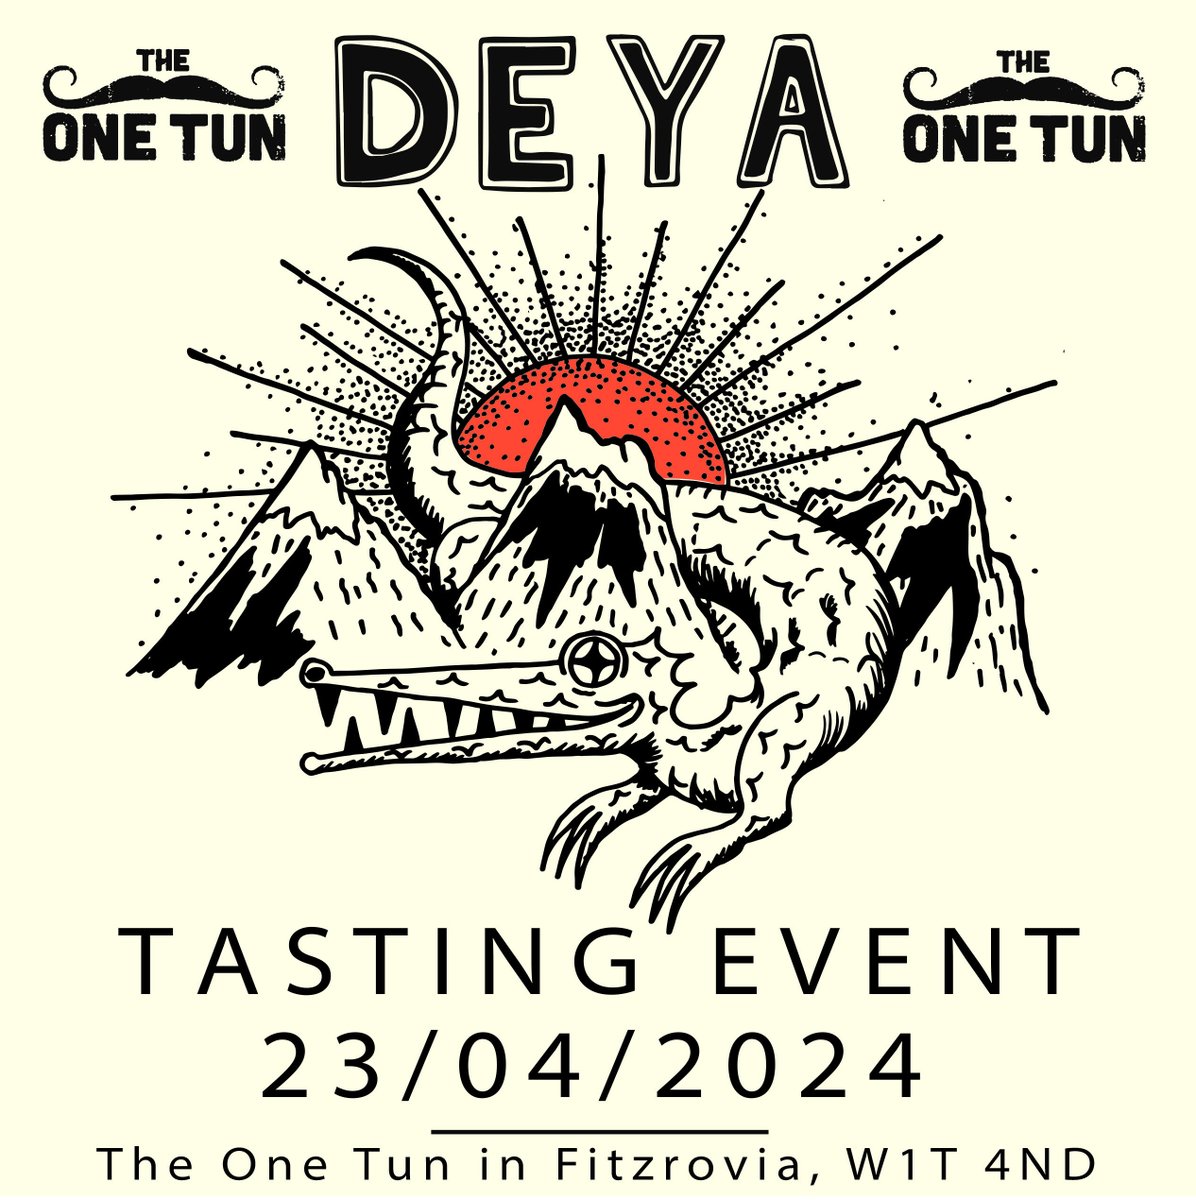 Join us for a Tasting Event with @deyabrewery. #23/04/2024# Don't miss out on this flavorful experience!!! Live sport ON ⚽️ 8pm EVERTON vs LIVERPOOL ⚽️🏆 #beer #beertasting #pubevents #Goodgstreet